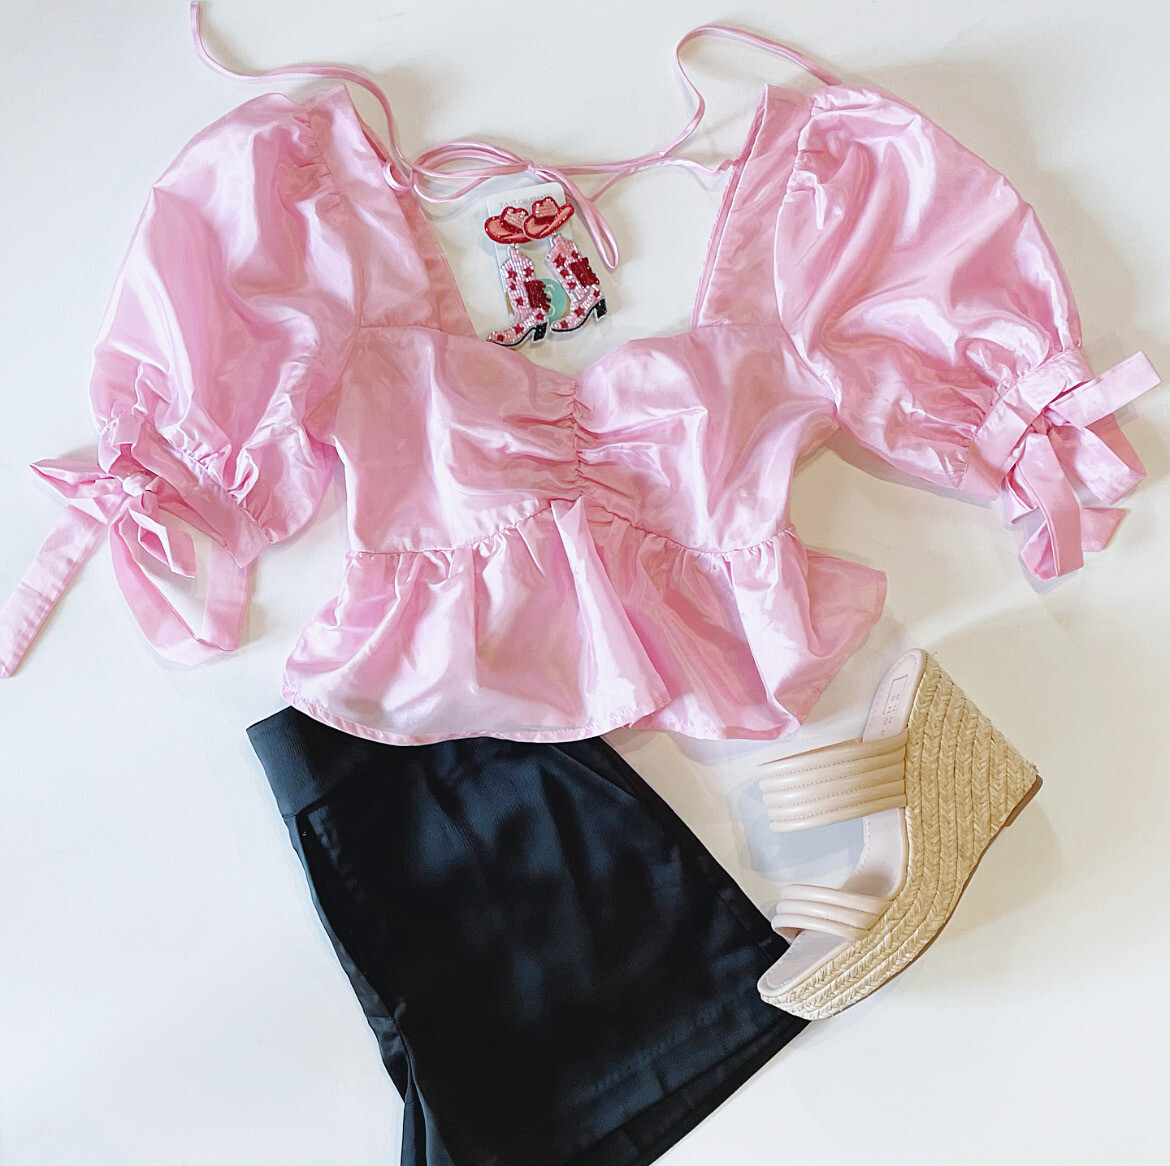 “Here To Party” Babydoll Top